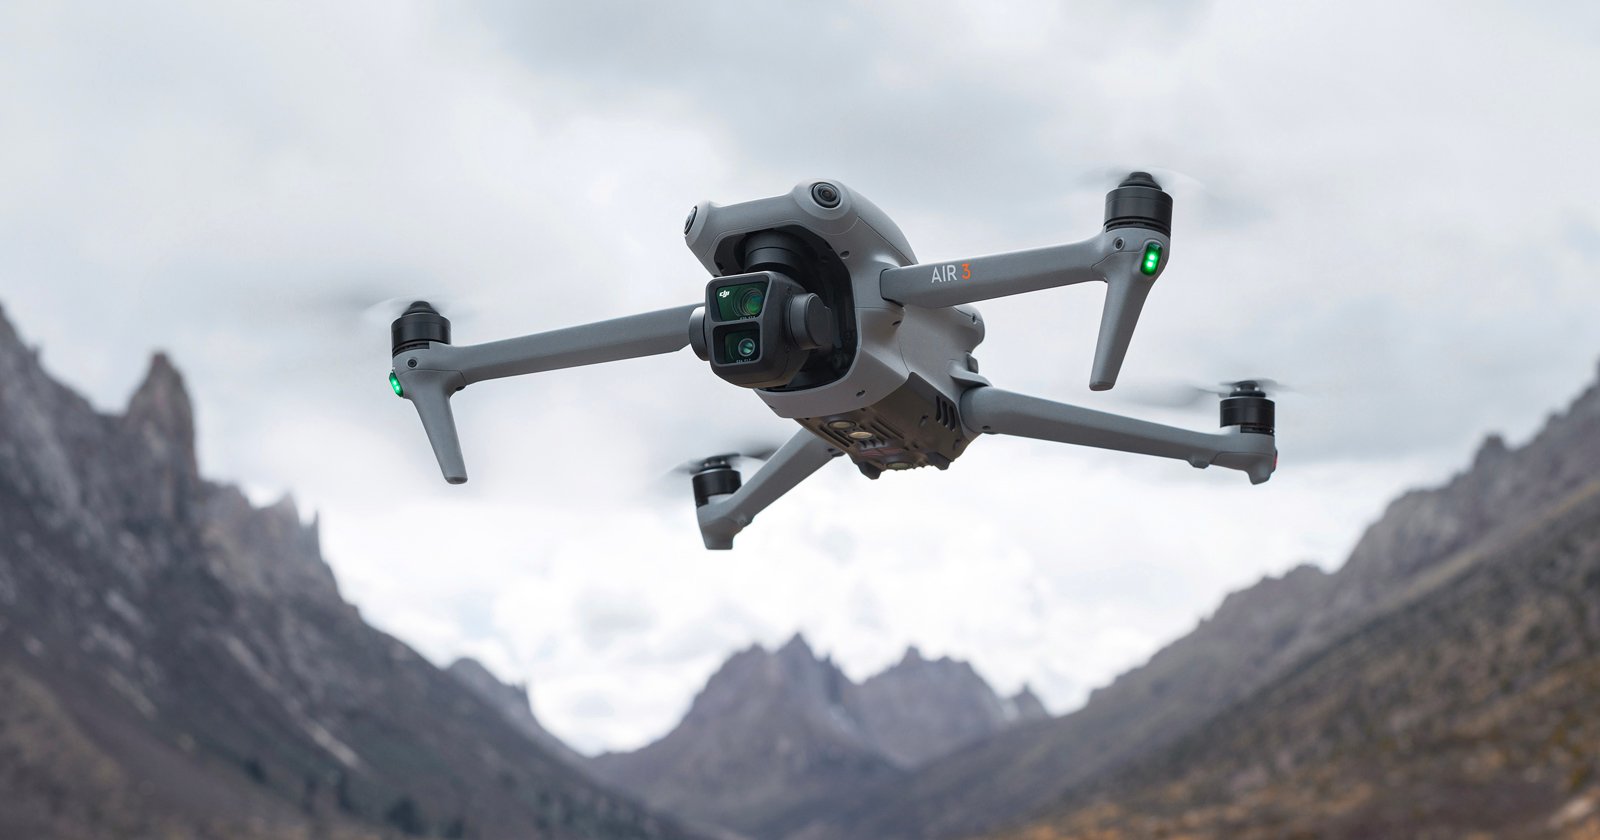 https://petapixel.com/assets/uploads/2023/07/The-DJI-Air-3-is-a-1099-Drone-with-Dual-Cameras-and-46-Minute-Battery.jpg